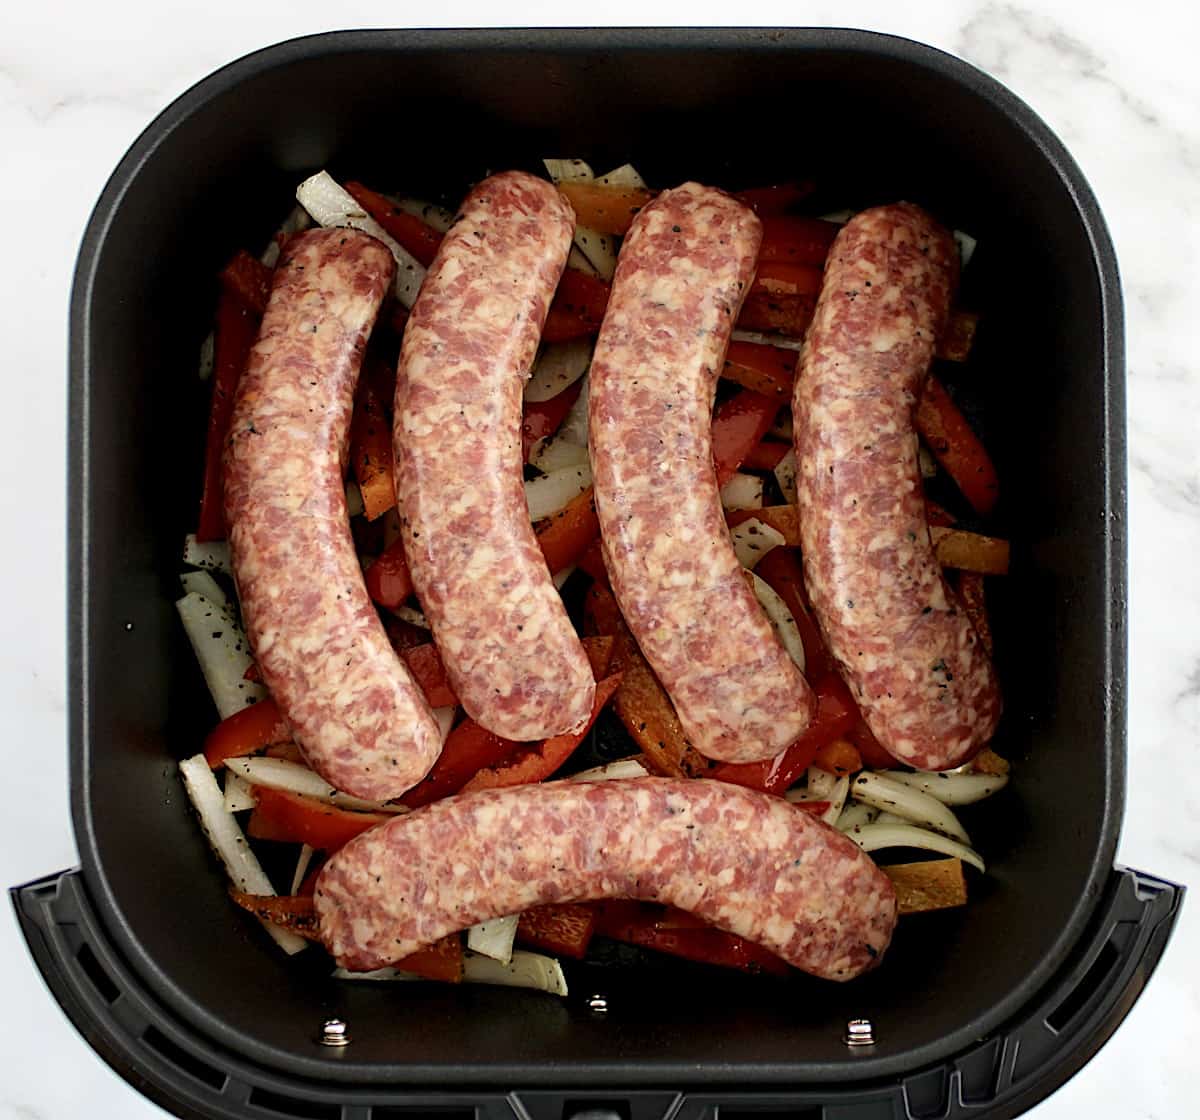 raw Italian Sausage and Peppers in air fryer basket